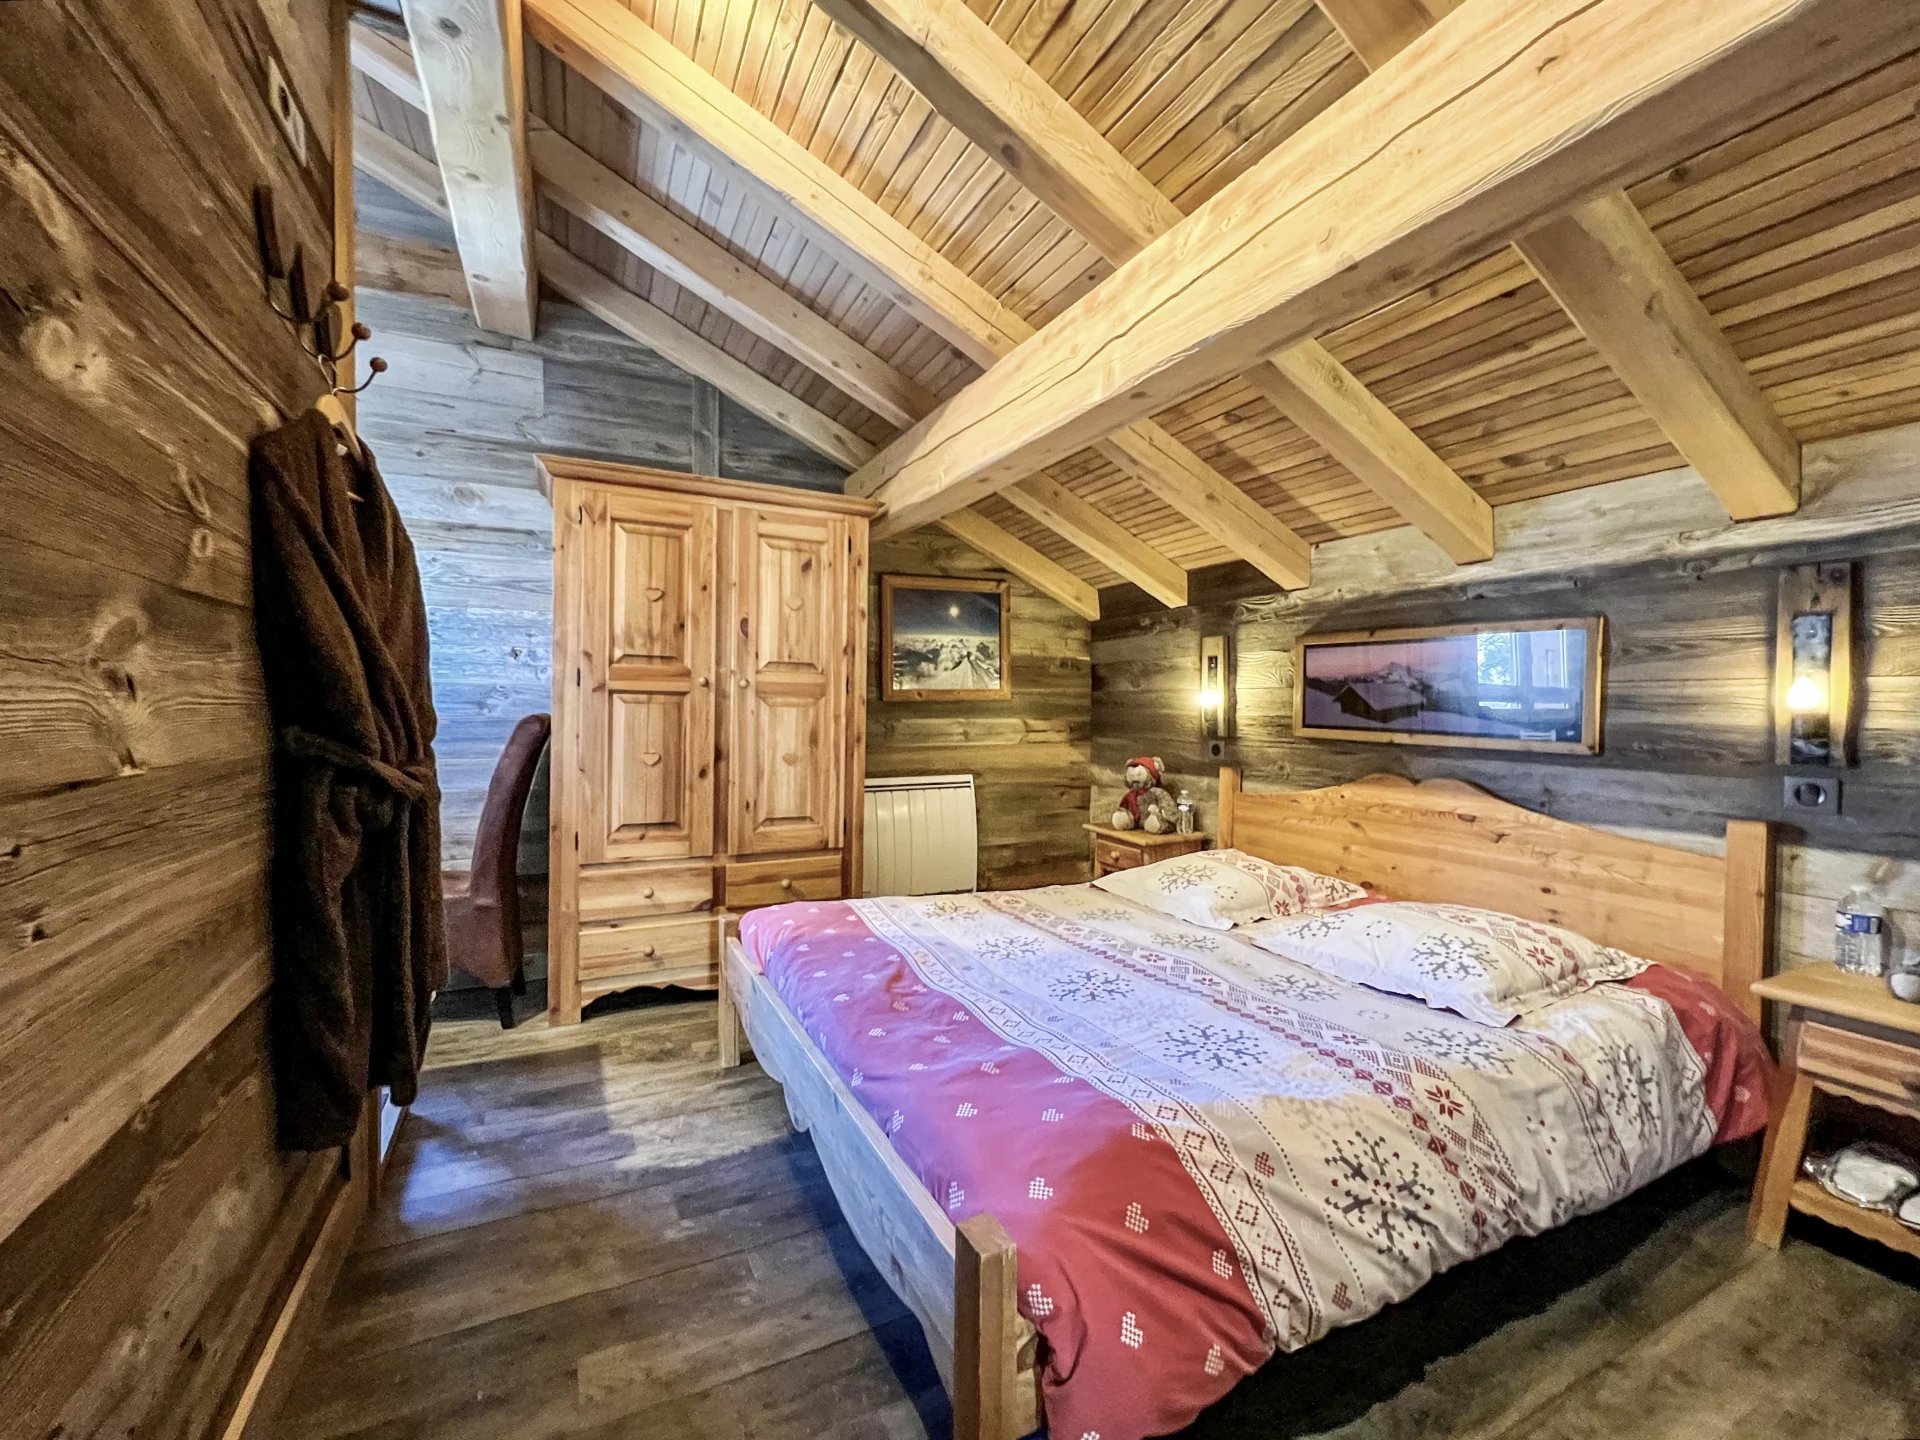 Francis+York+ Luxury Chalet in the La Plagne, French Alps 00015.jpeg